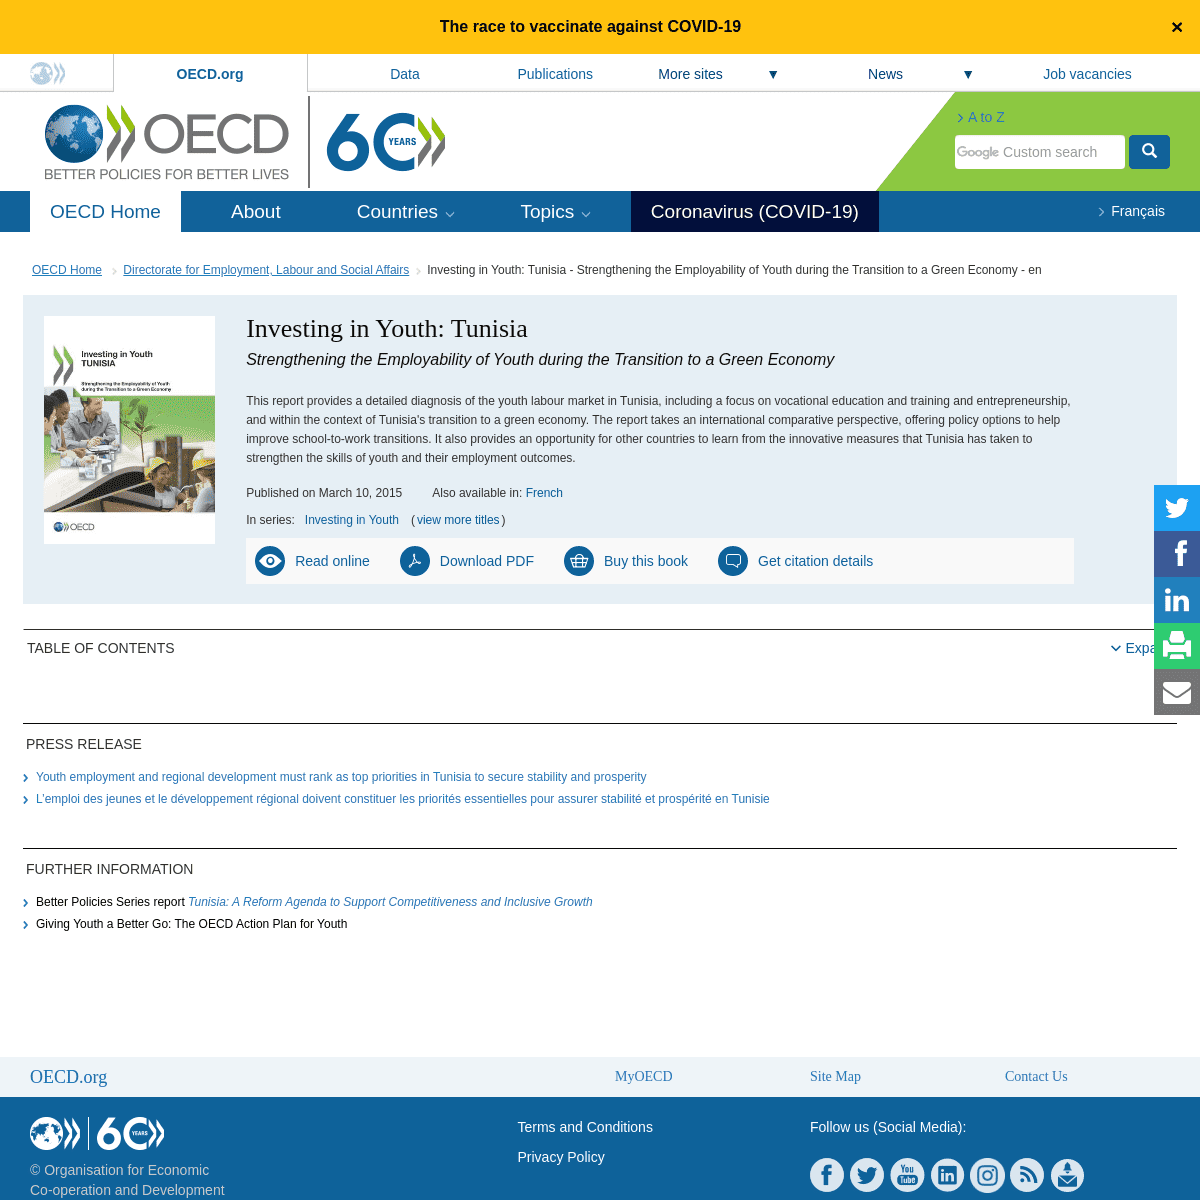 A complete backup of http://www.oecd.org/els/investing-in-youth-tunisia-9789264226470-en.htm